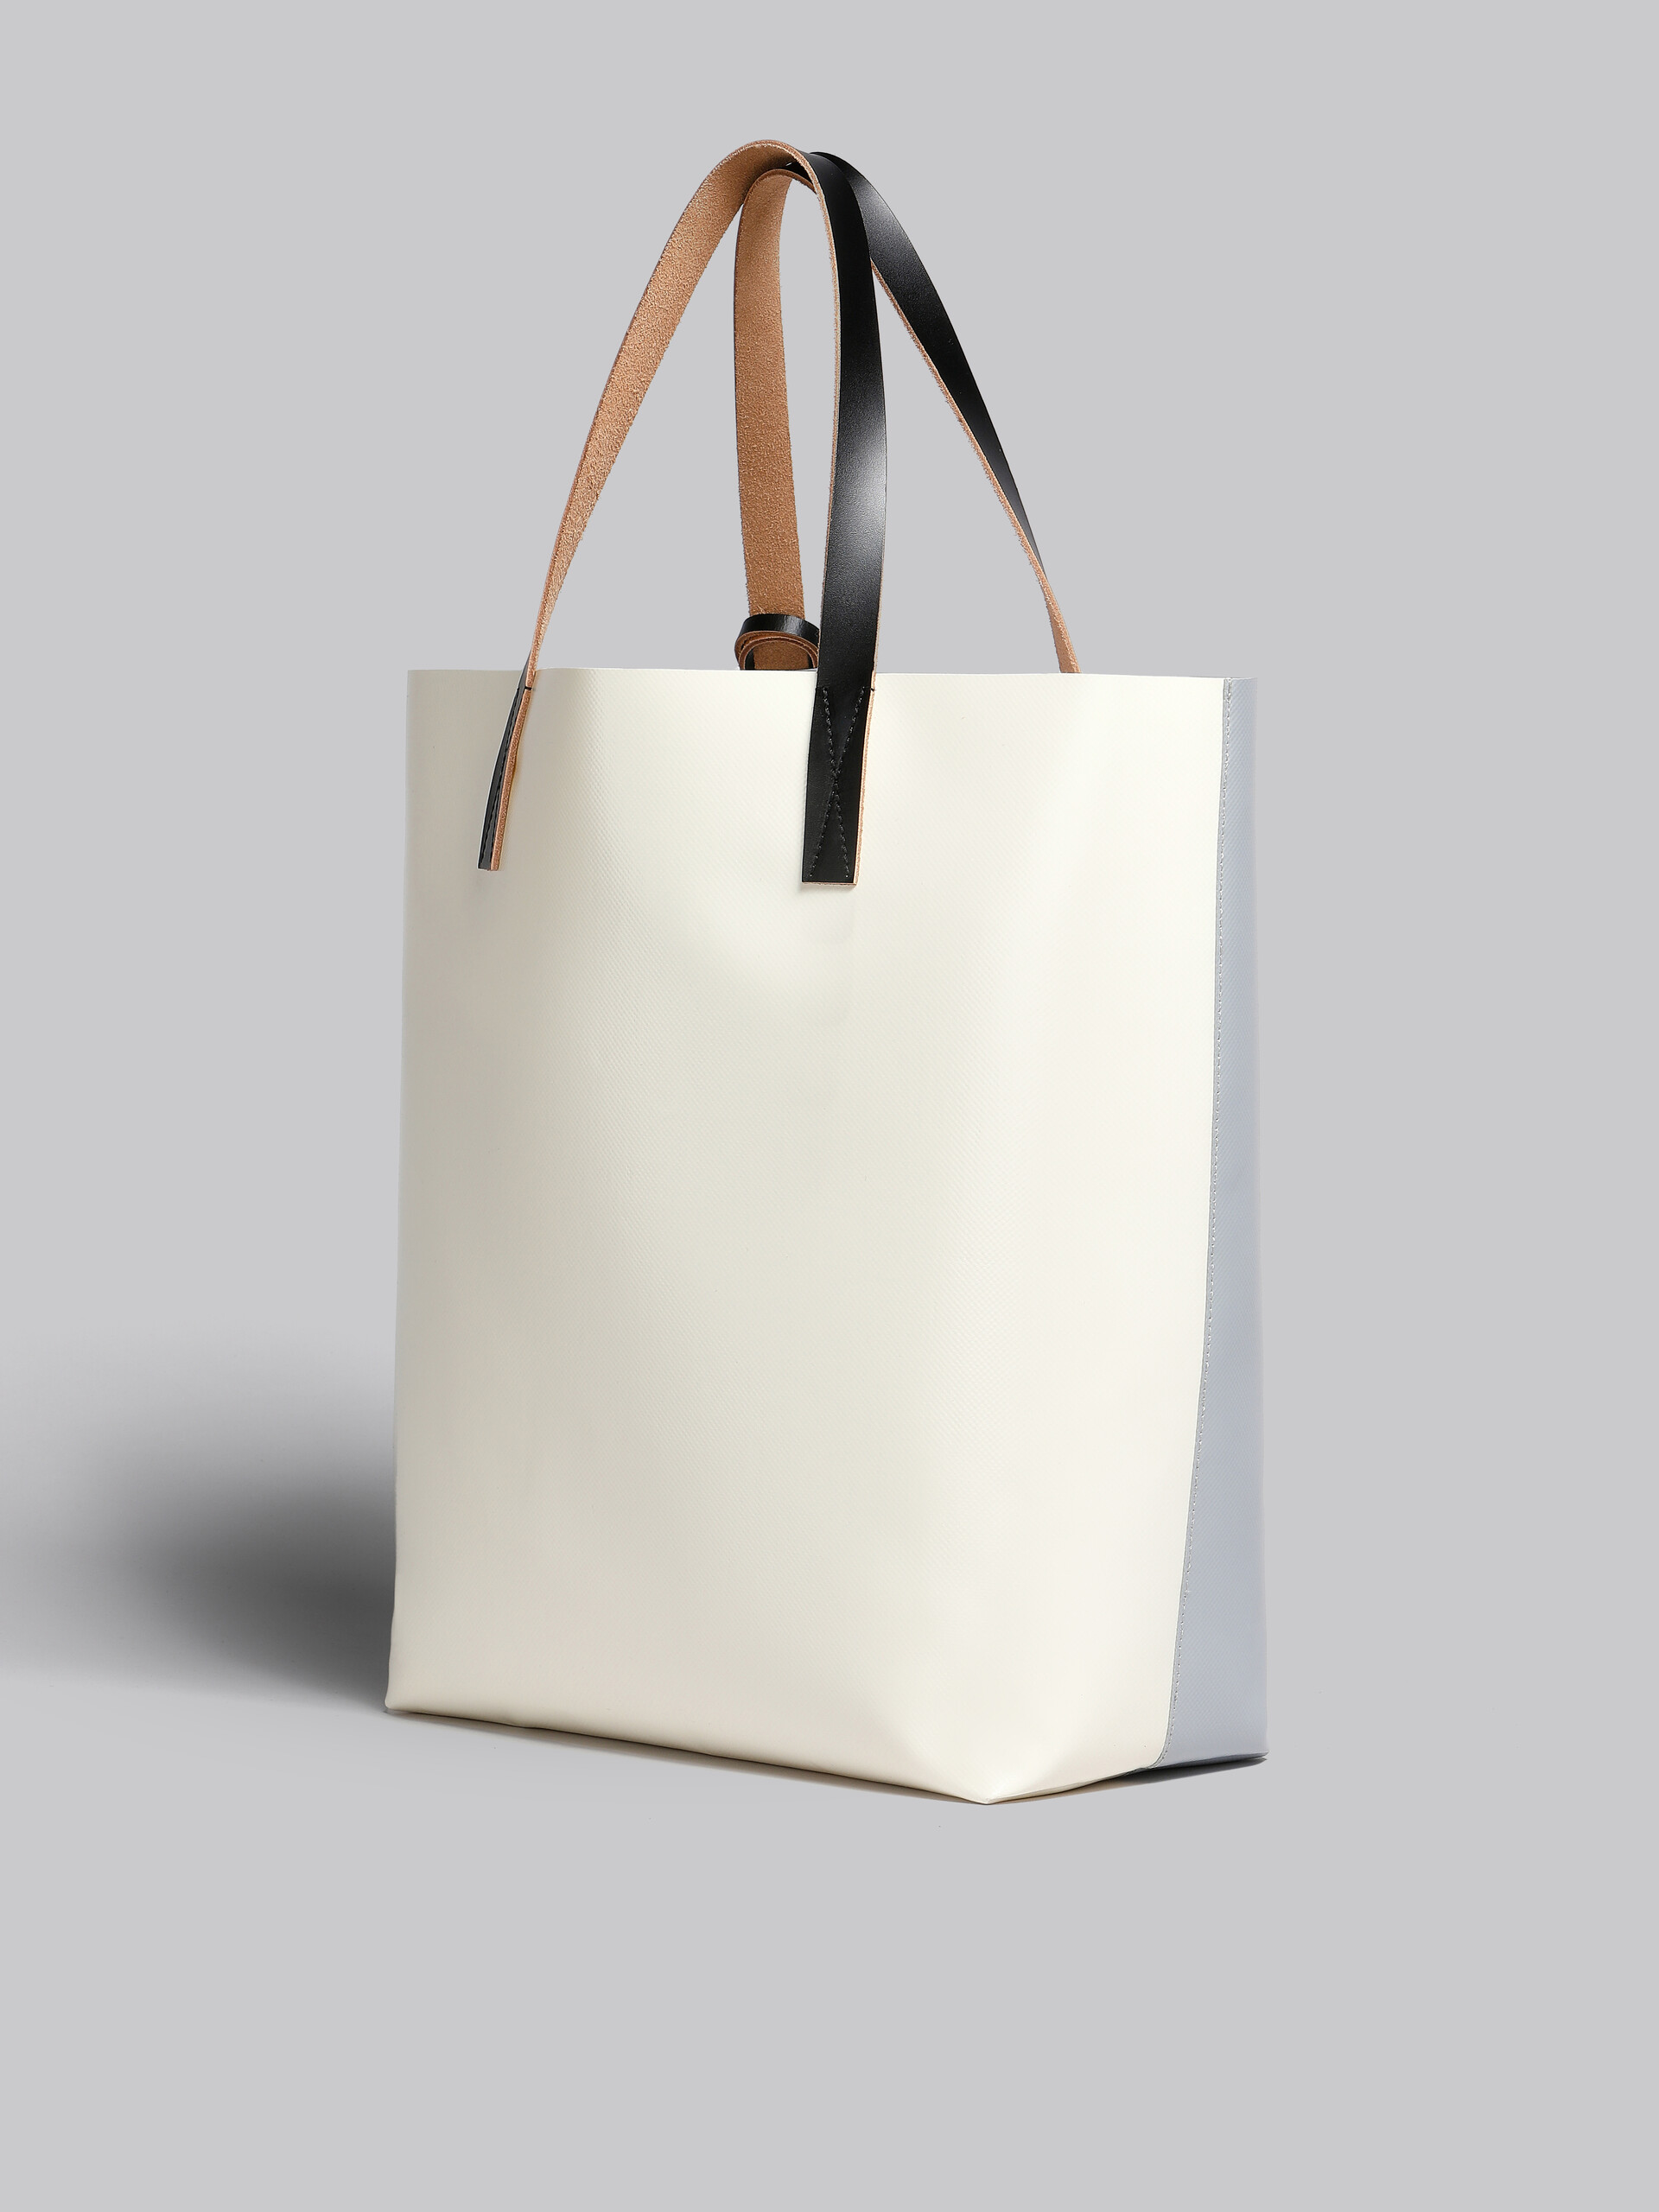 Tribeca Shopping Bag in silver and beige | Marni